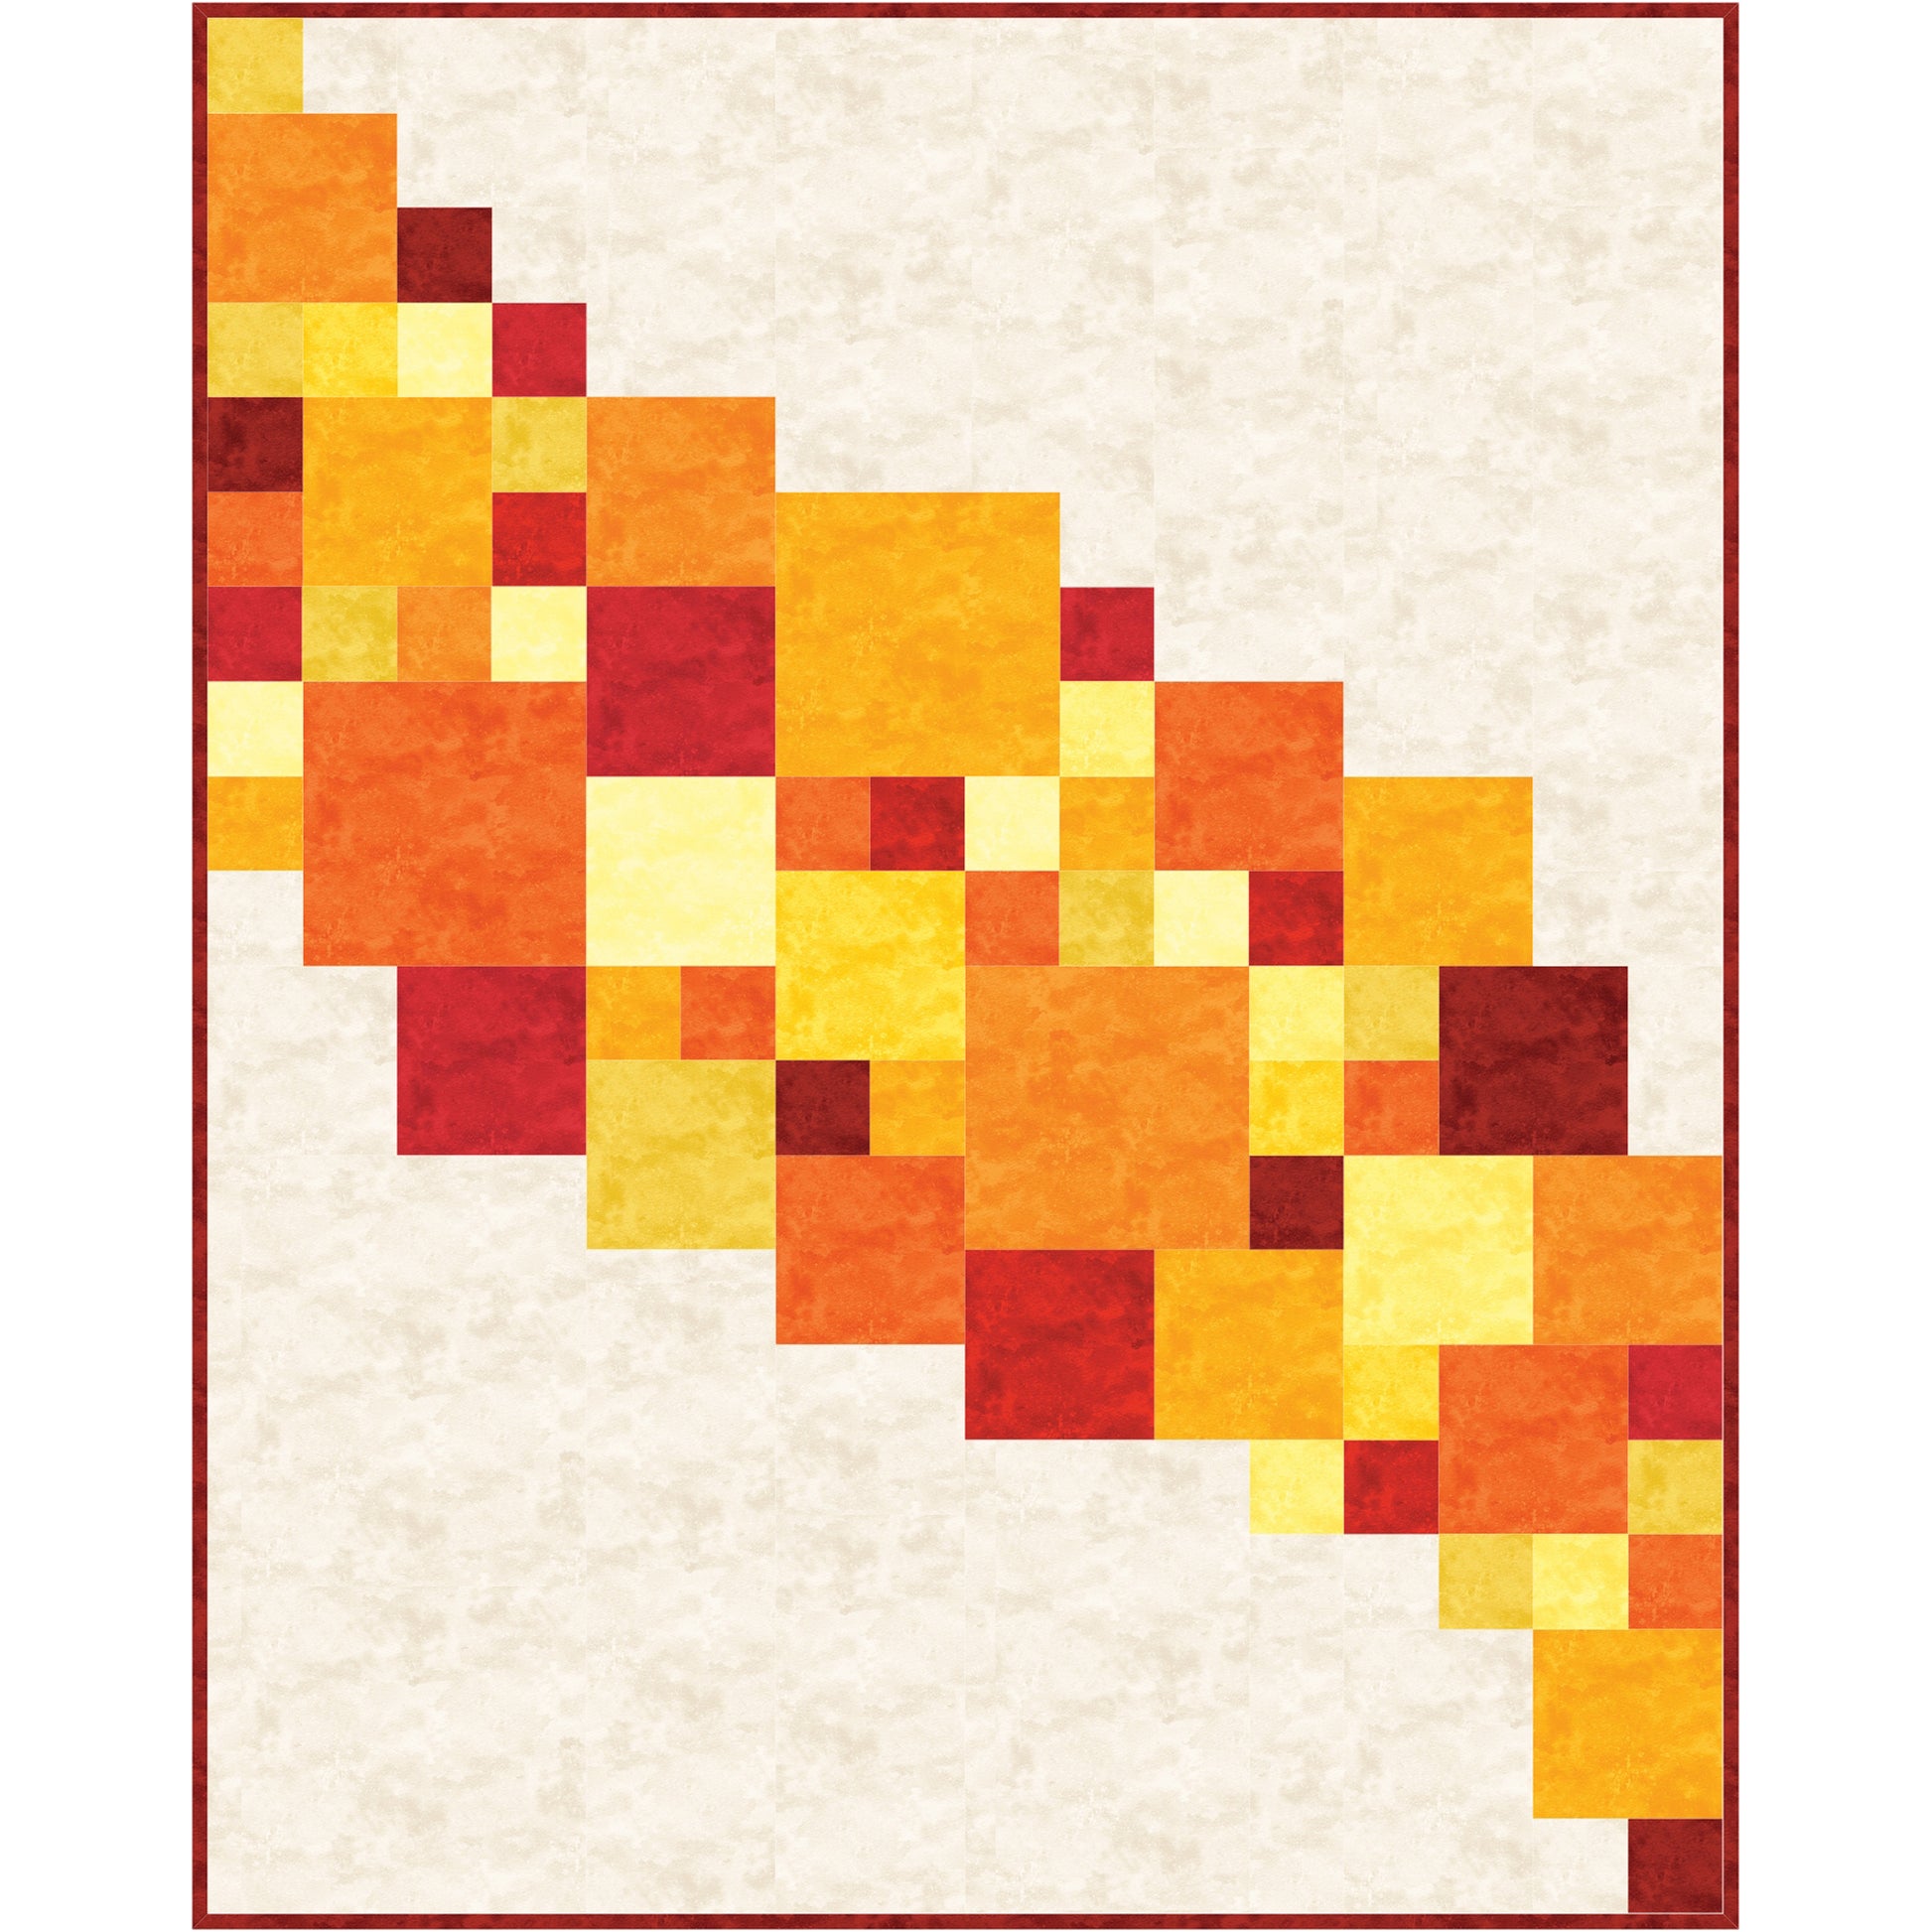 A colorful quilt with red, yellow, and orange squares.